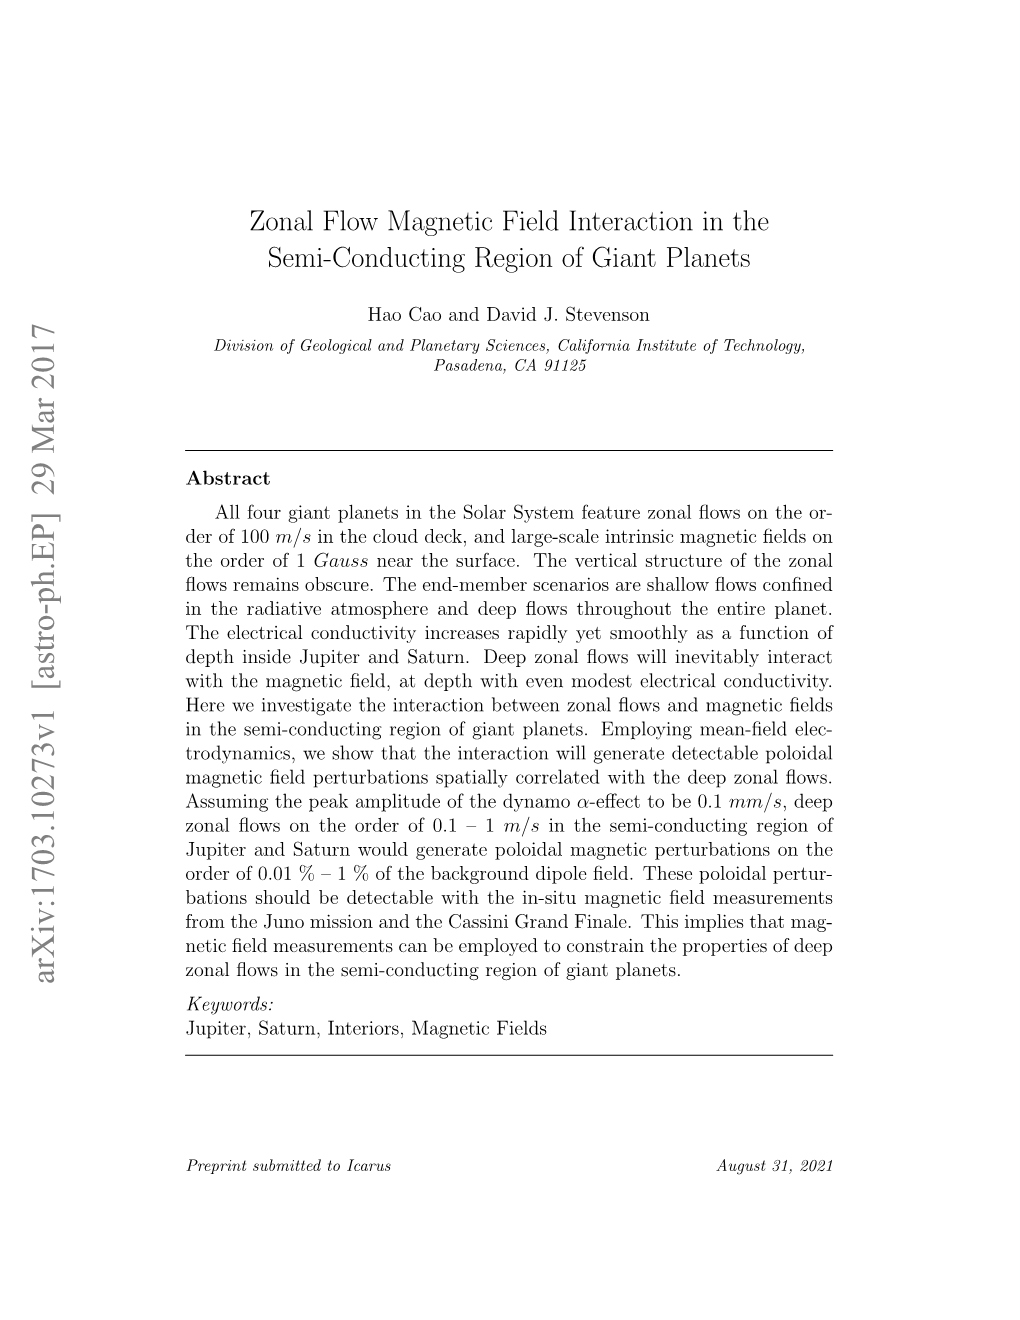 Zonal Flow Magnetic Field Interaction in the Semi-Conducting Region of Giant Planets